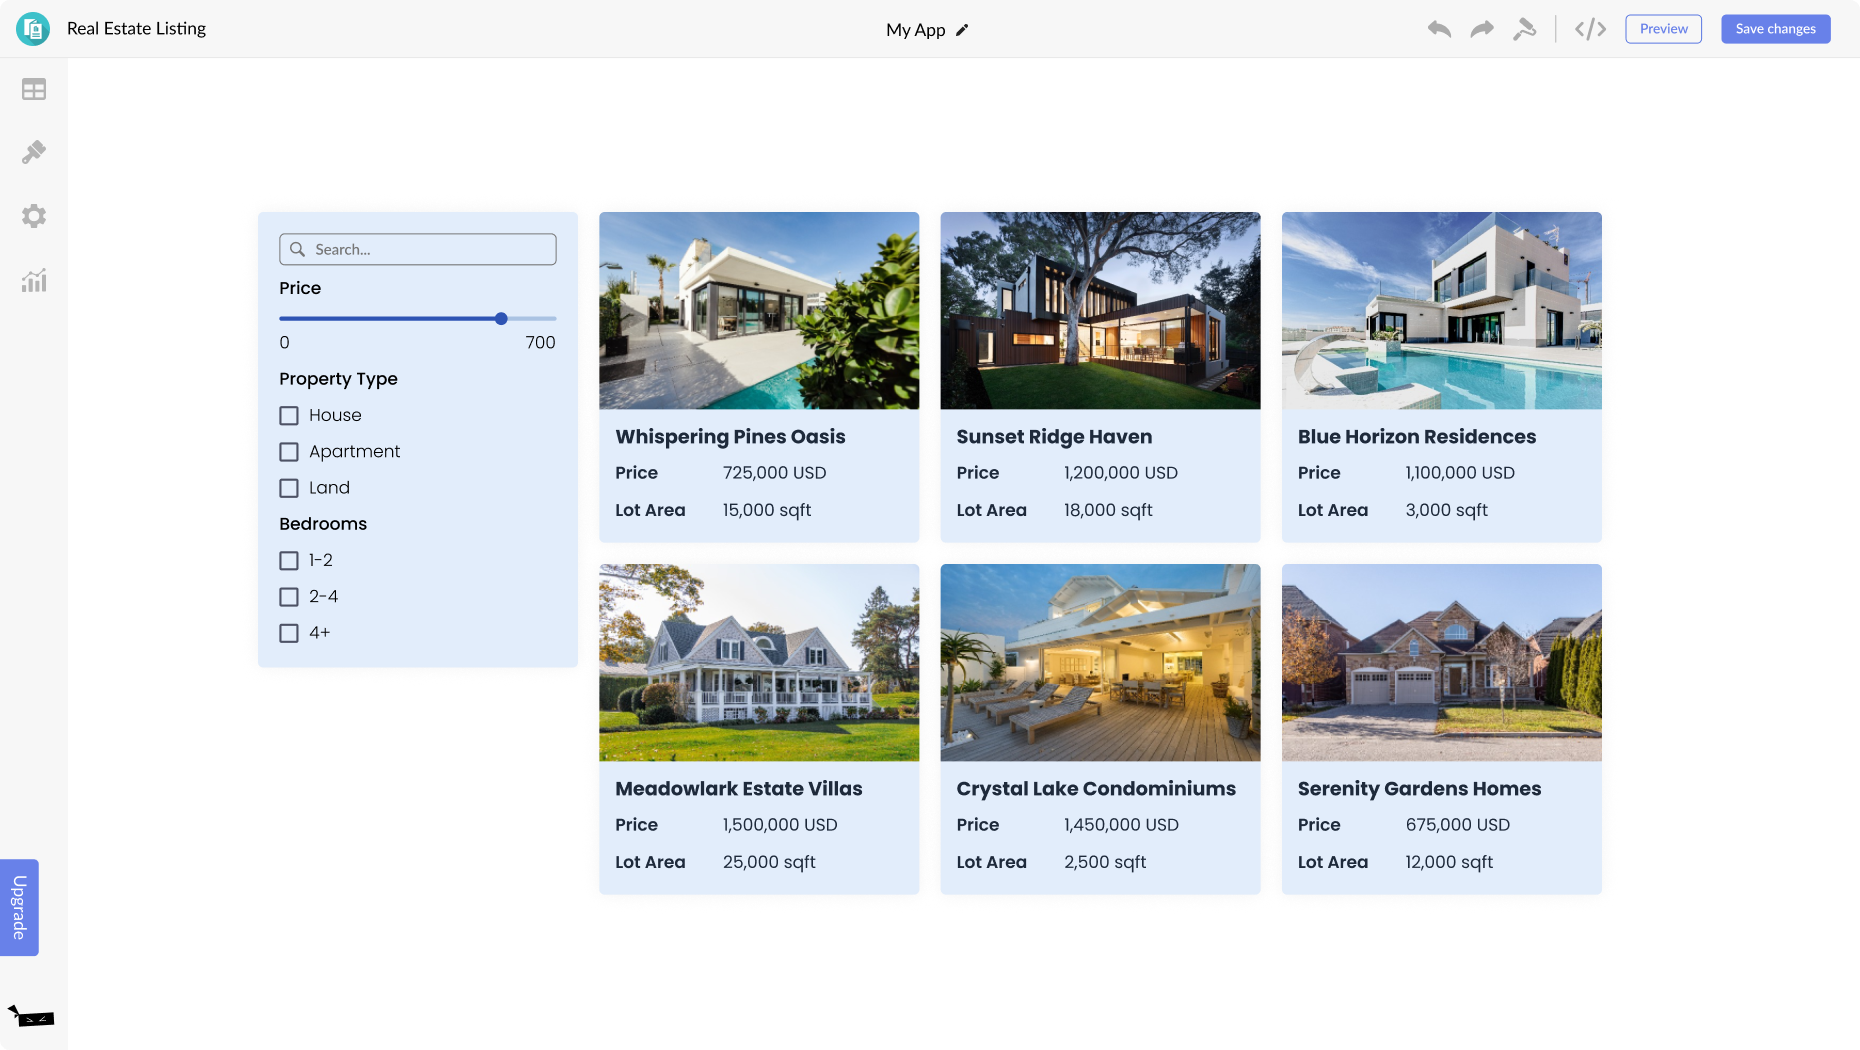 Real Estate Listings for  Onepage